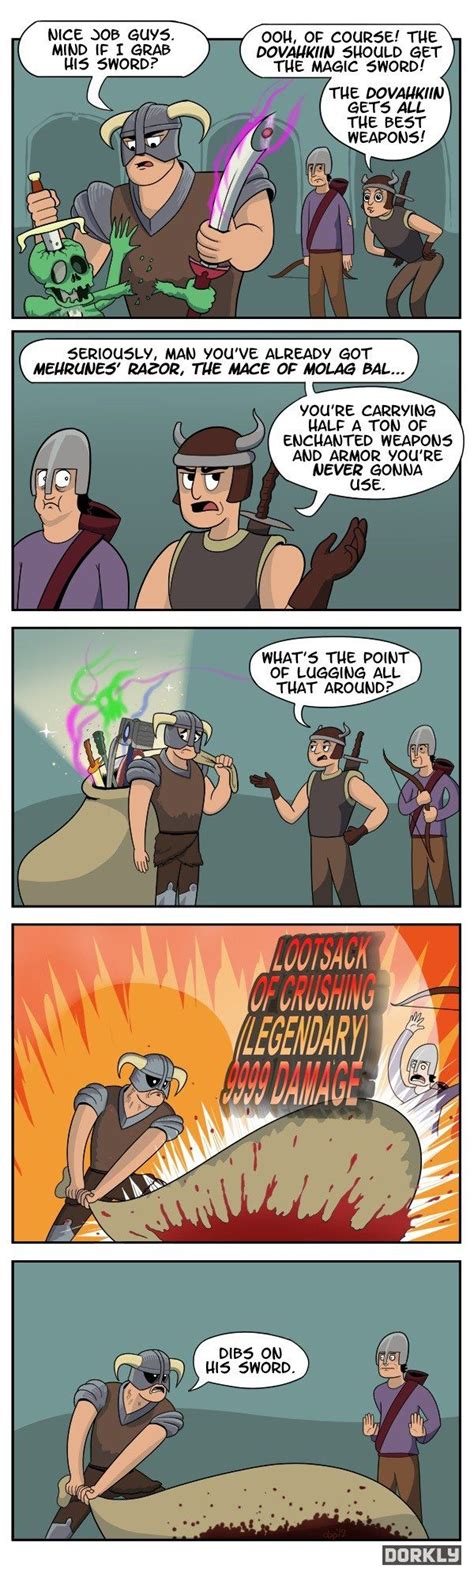 17 Best Images About Skyrim Funny On Pinterest Jokes